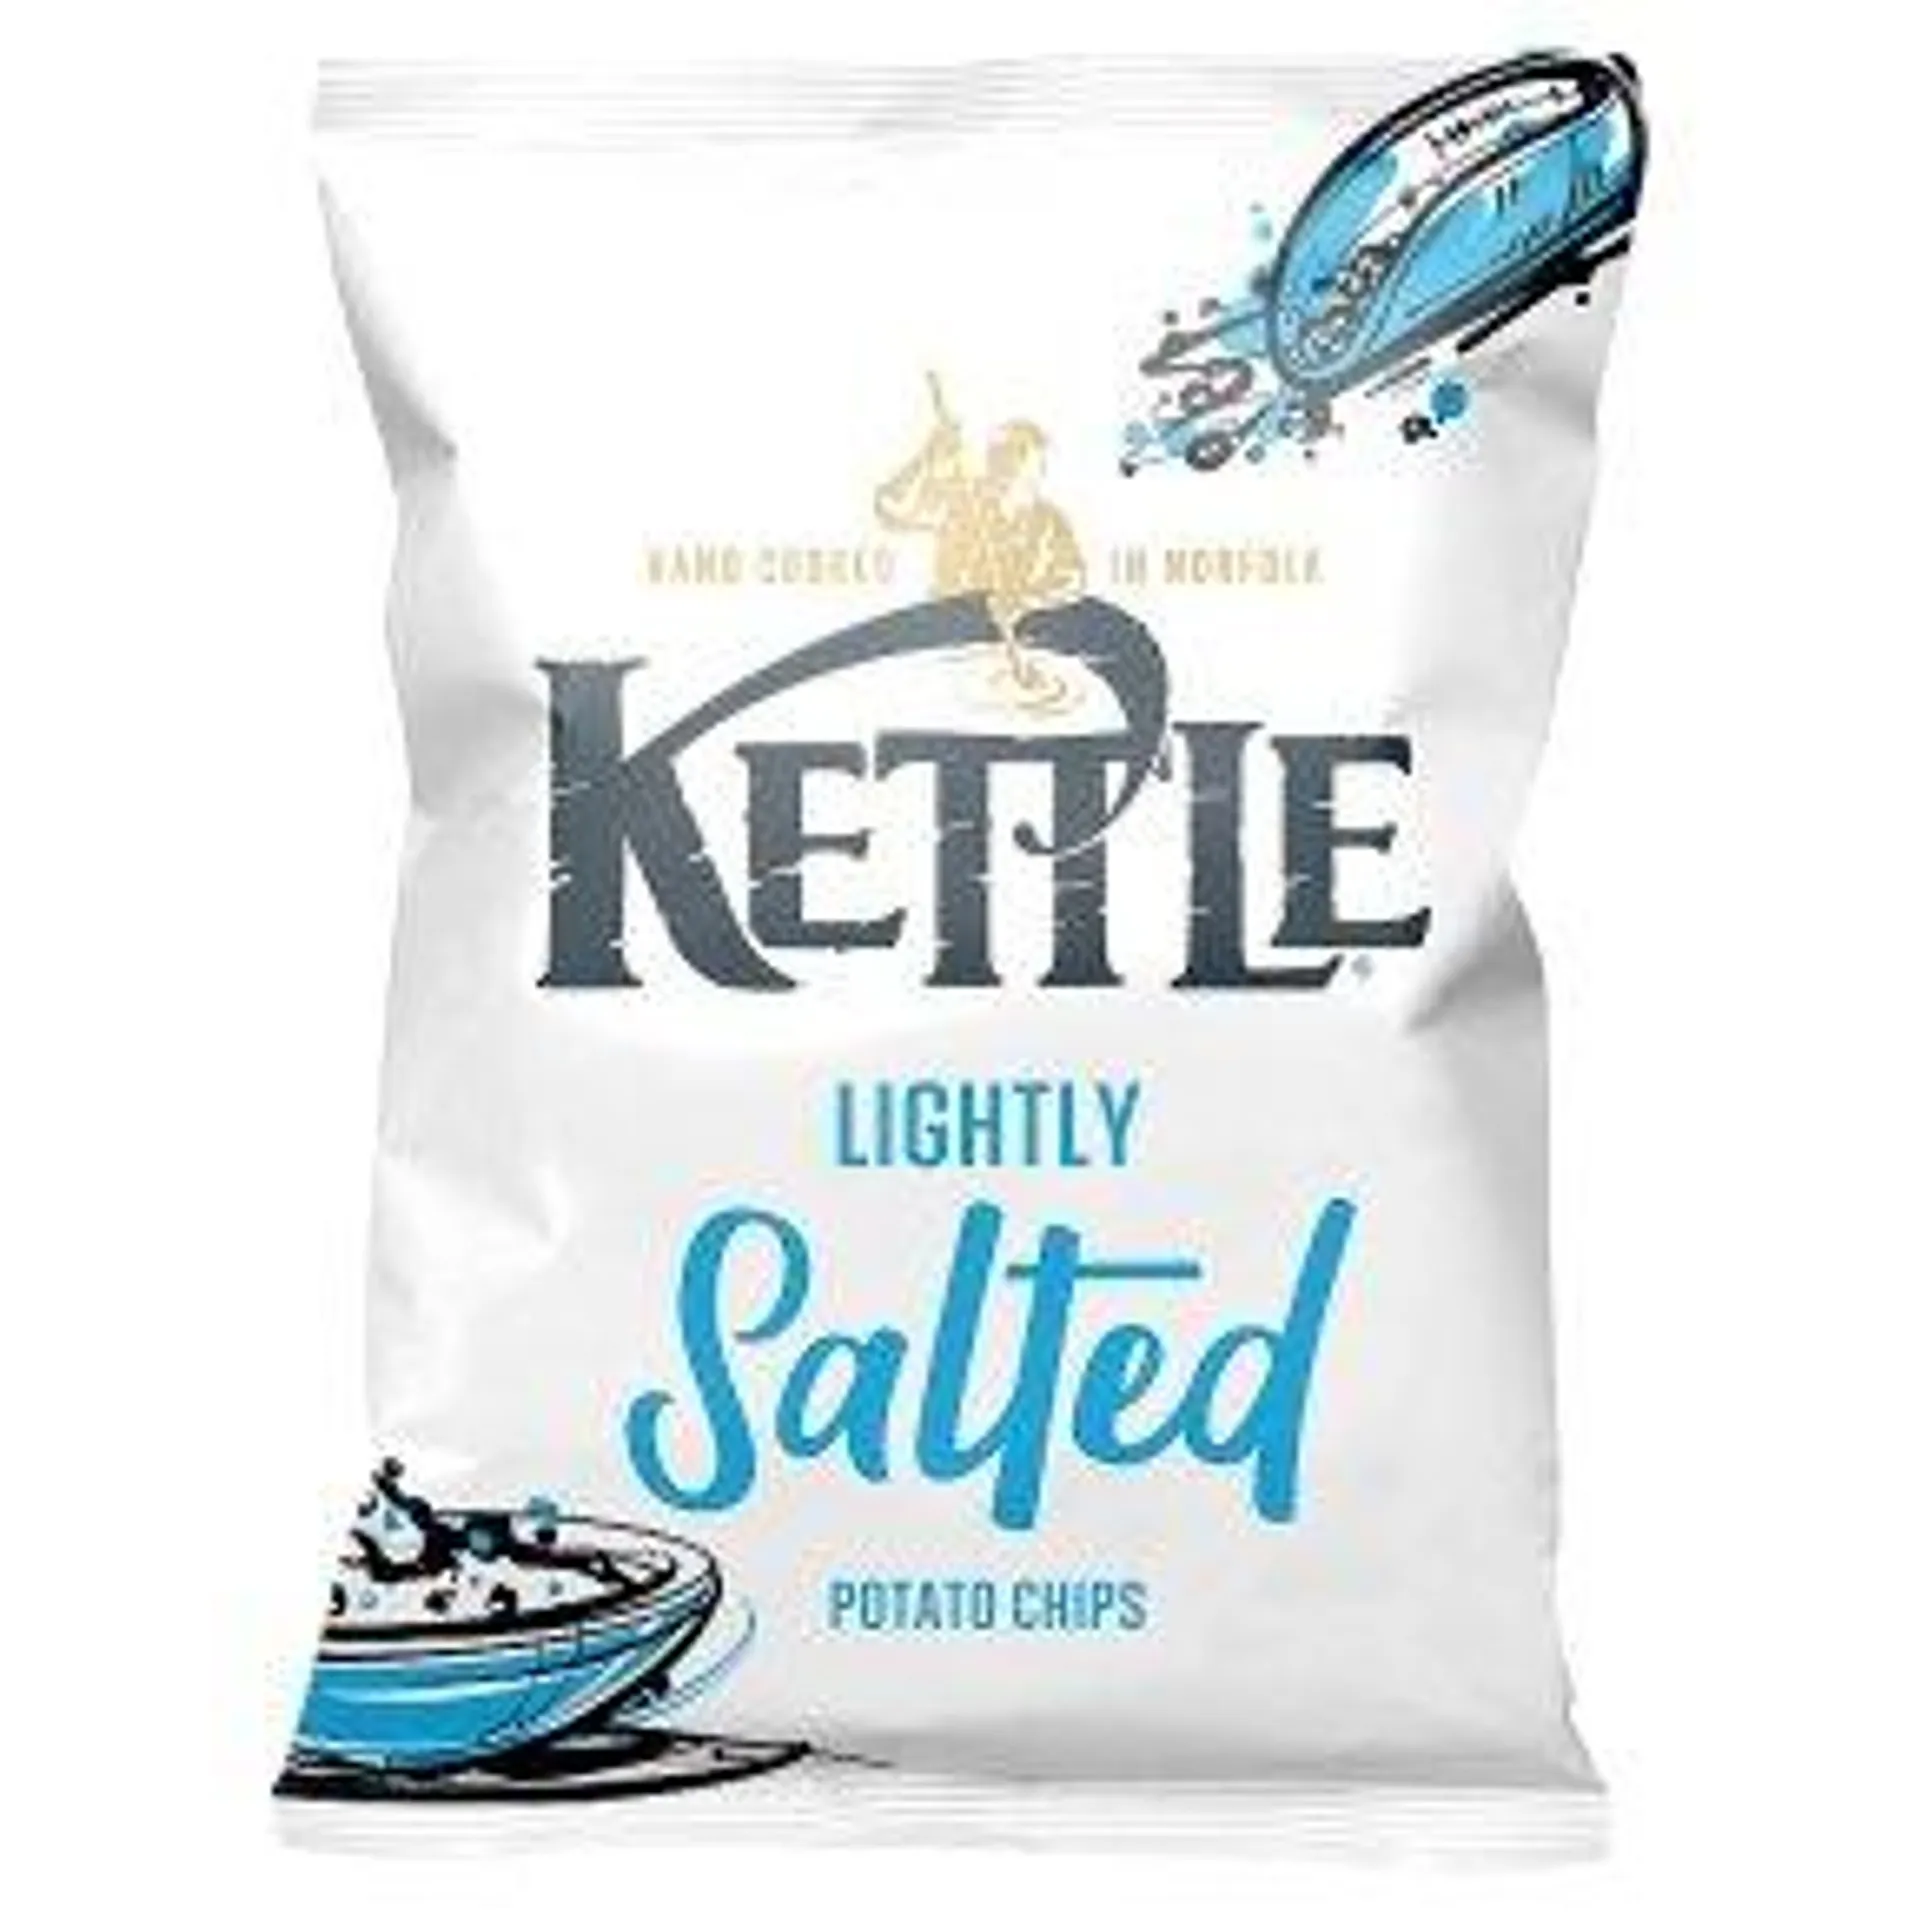 Kettle Chips Lightly Salted